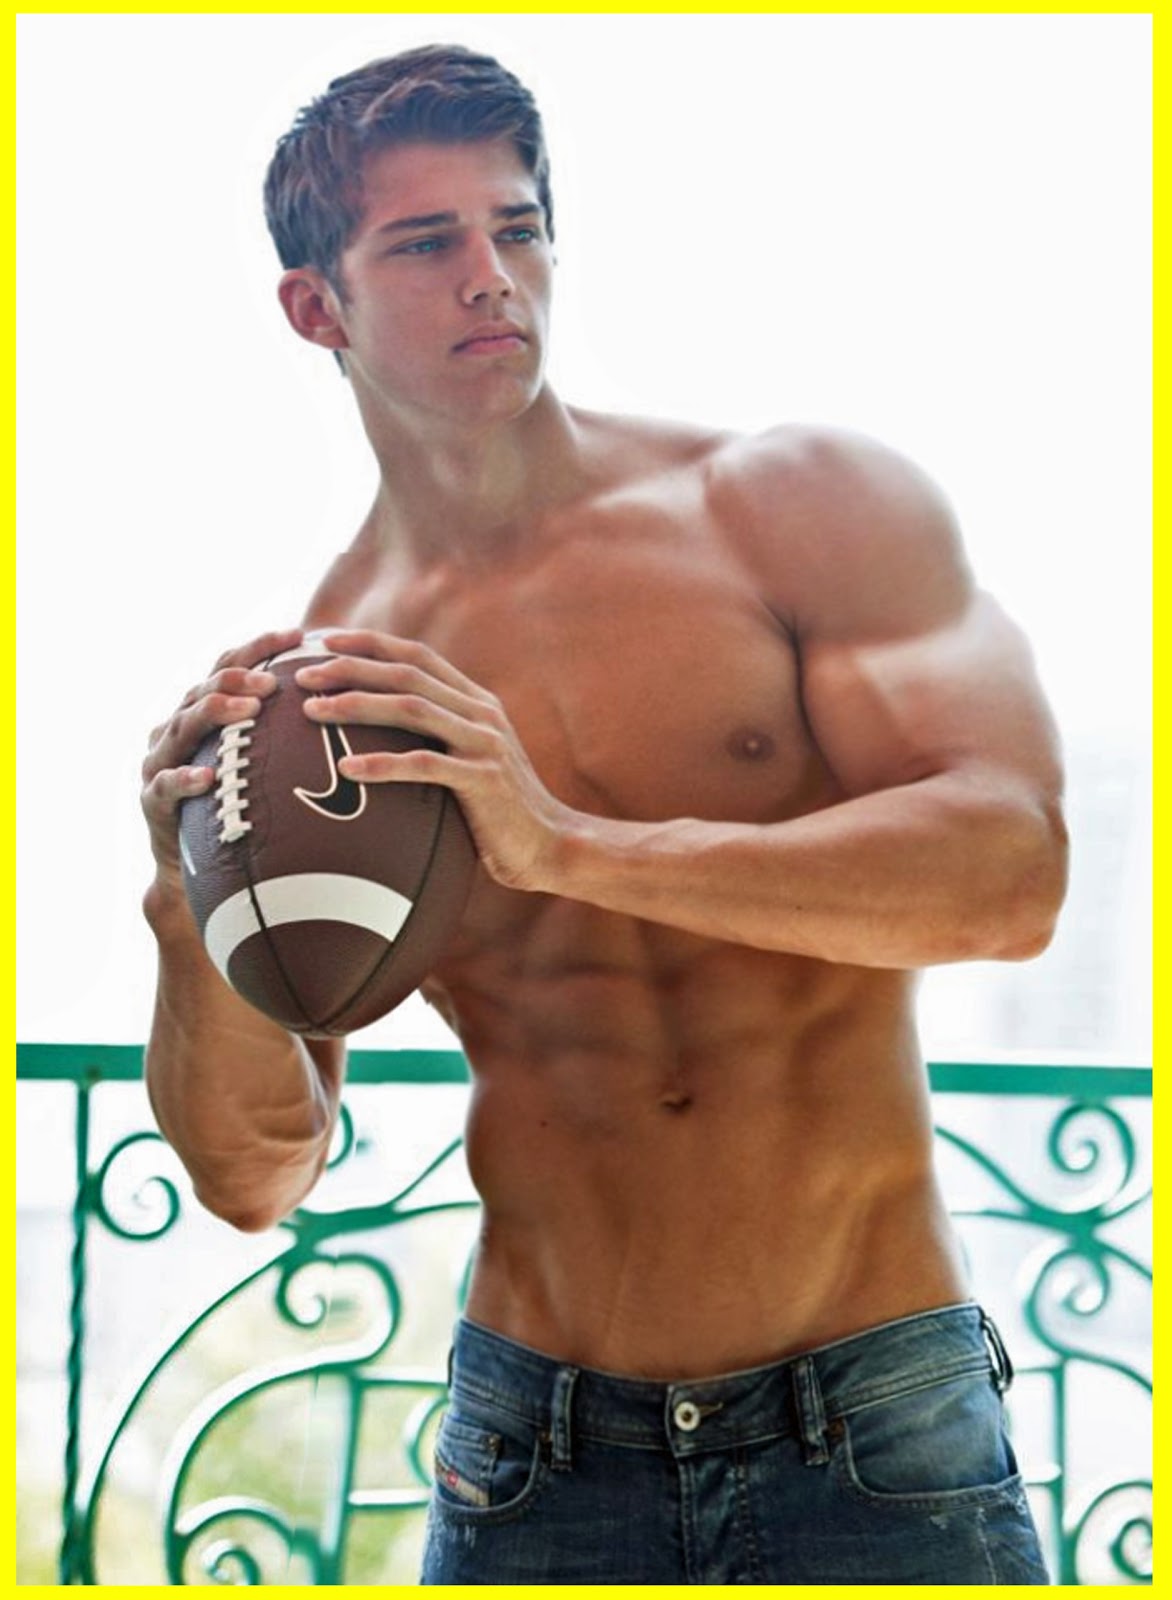 Young muscle stud